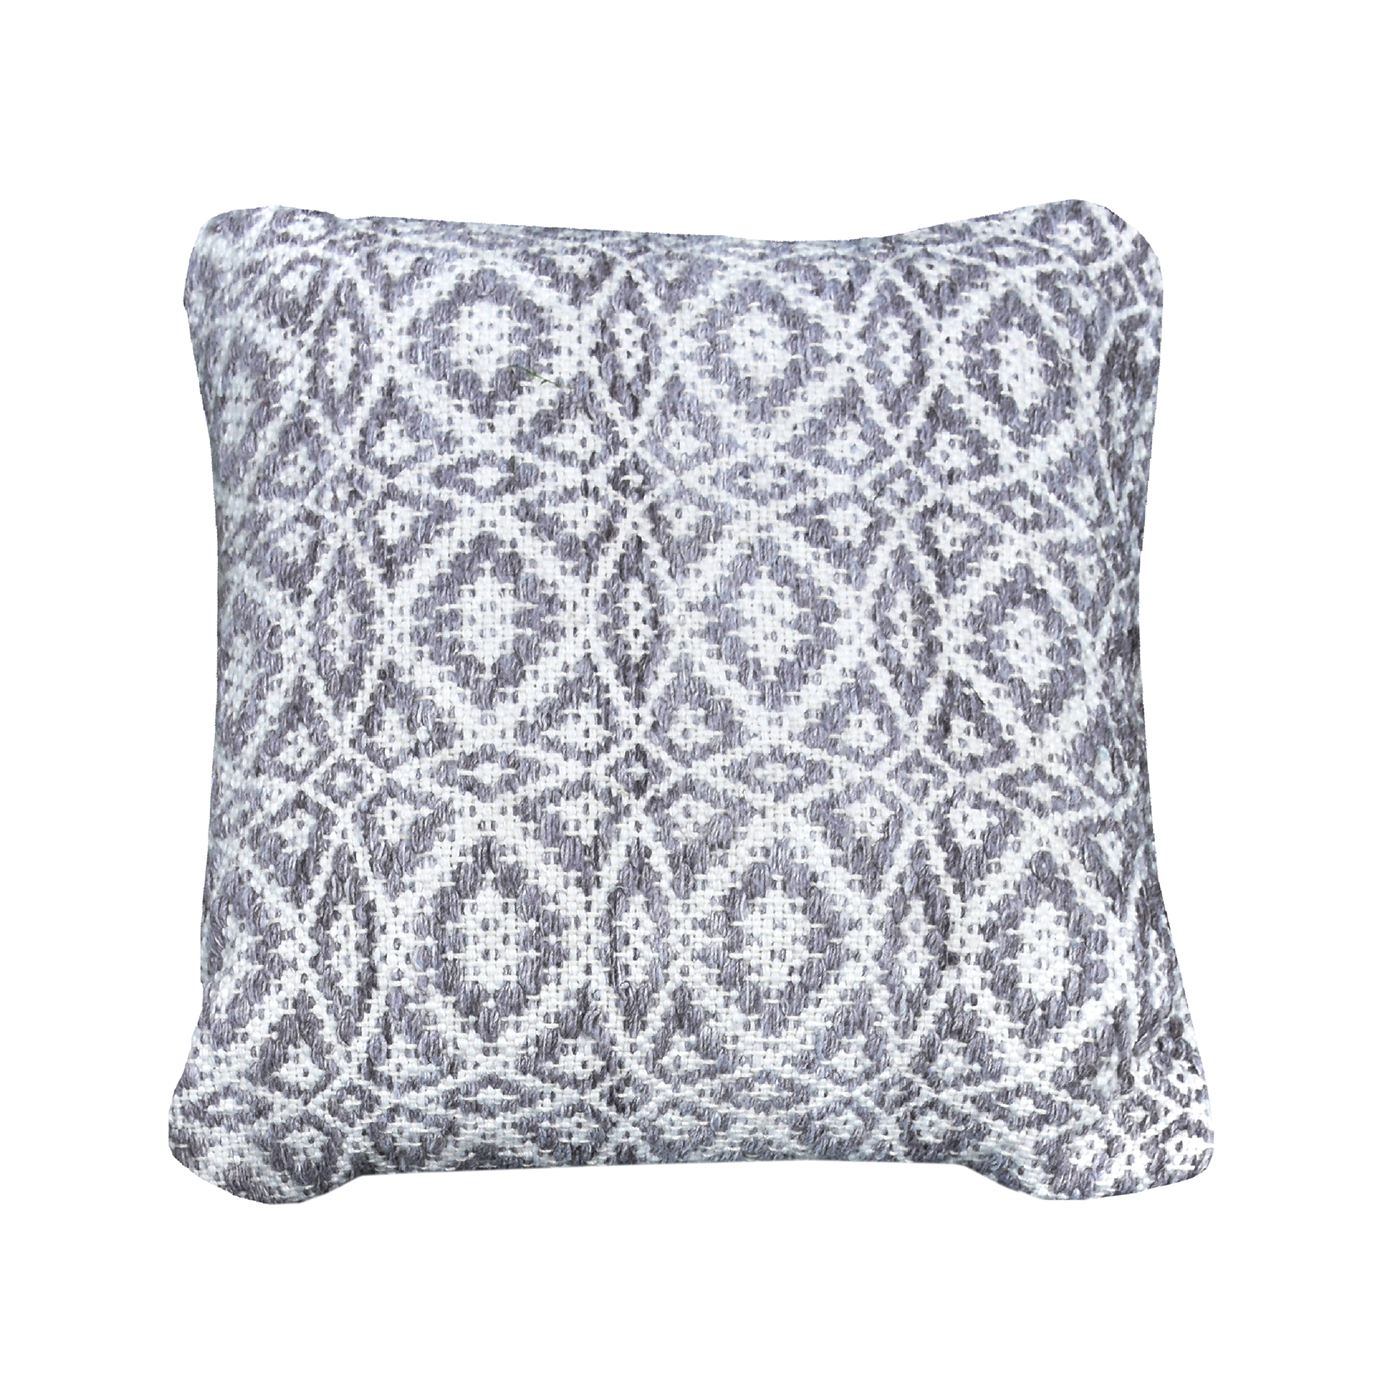 Maderia Pillow, Pet, Taupe, Pitloom, Flat Weave